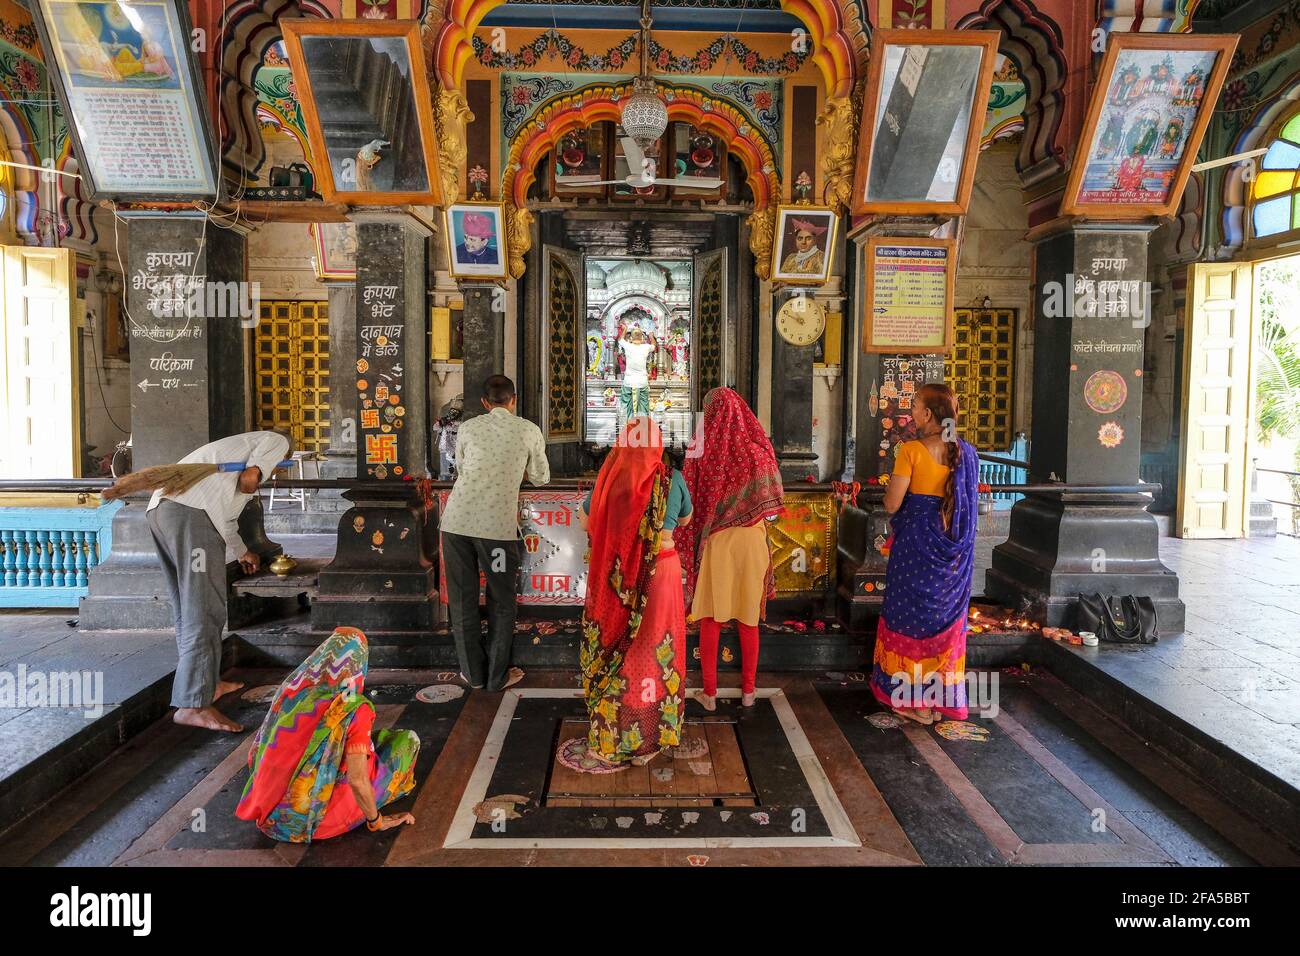 Ujjain, India - March 2021: People making offerings at the Gopal Temple in Ujjain on March 24, 2021 in Madhya Pradesh, India. Stock Photo